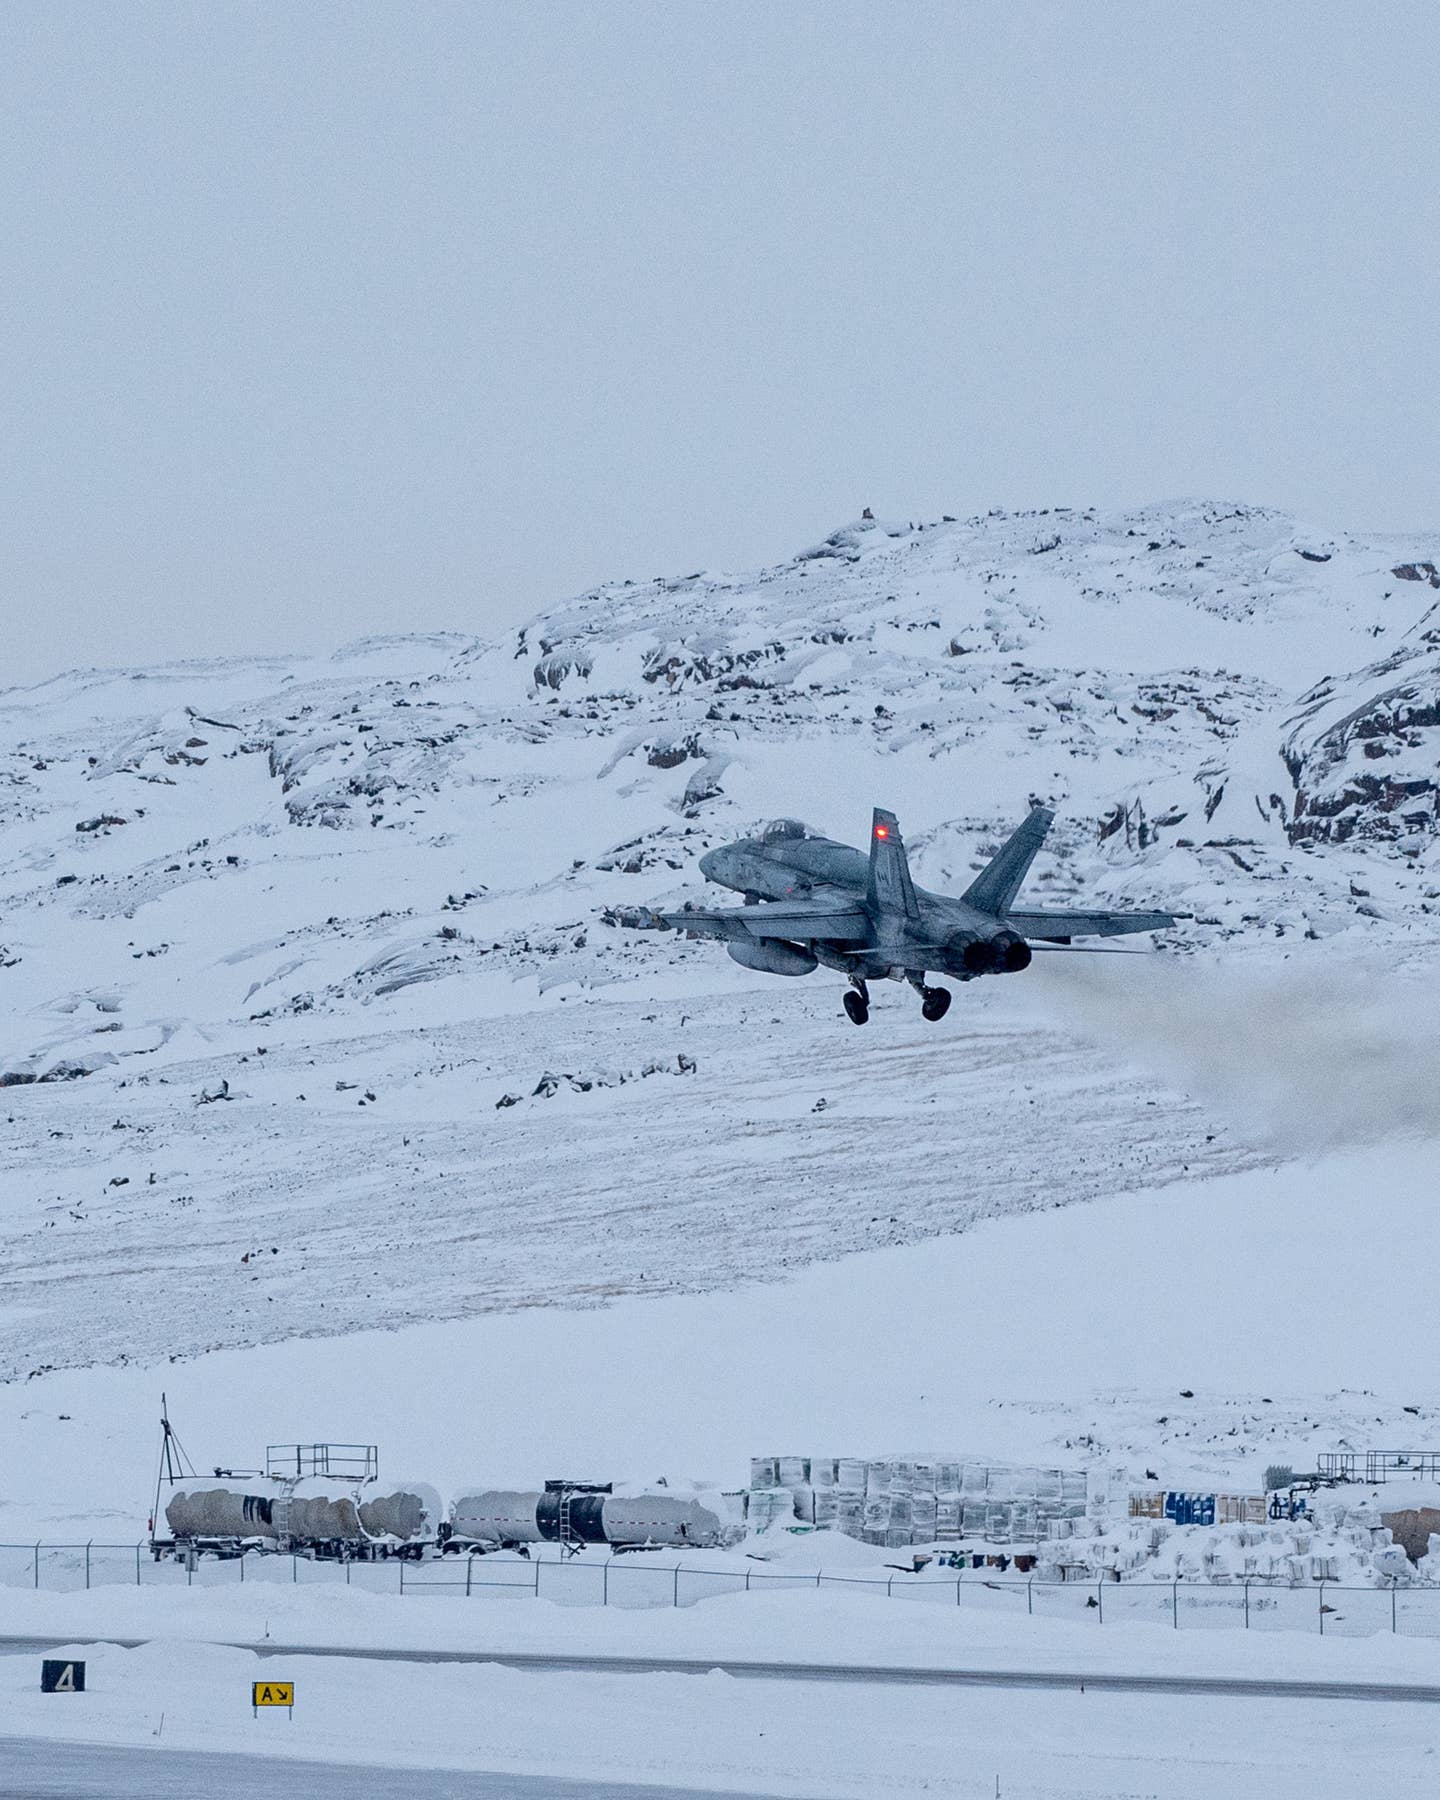 A Royal Canadian Air Force CF-18 Hornet from 3 Wing Bagotville takes off from Iqaluit Airport during Operation Noble Defender in the Canadian Arctic region, Iqaluit, Nunavut, Canada, Jan. 27, 2023. <em>Canadian NORAD Region Public Affairs</em>